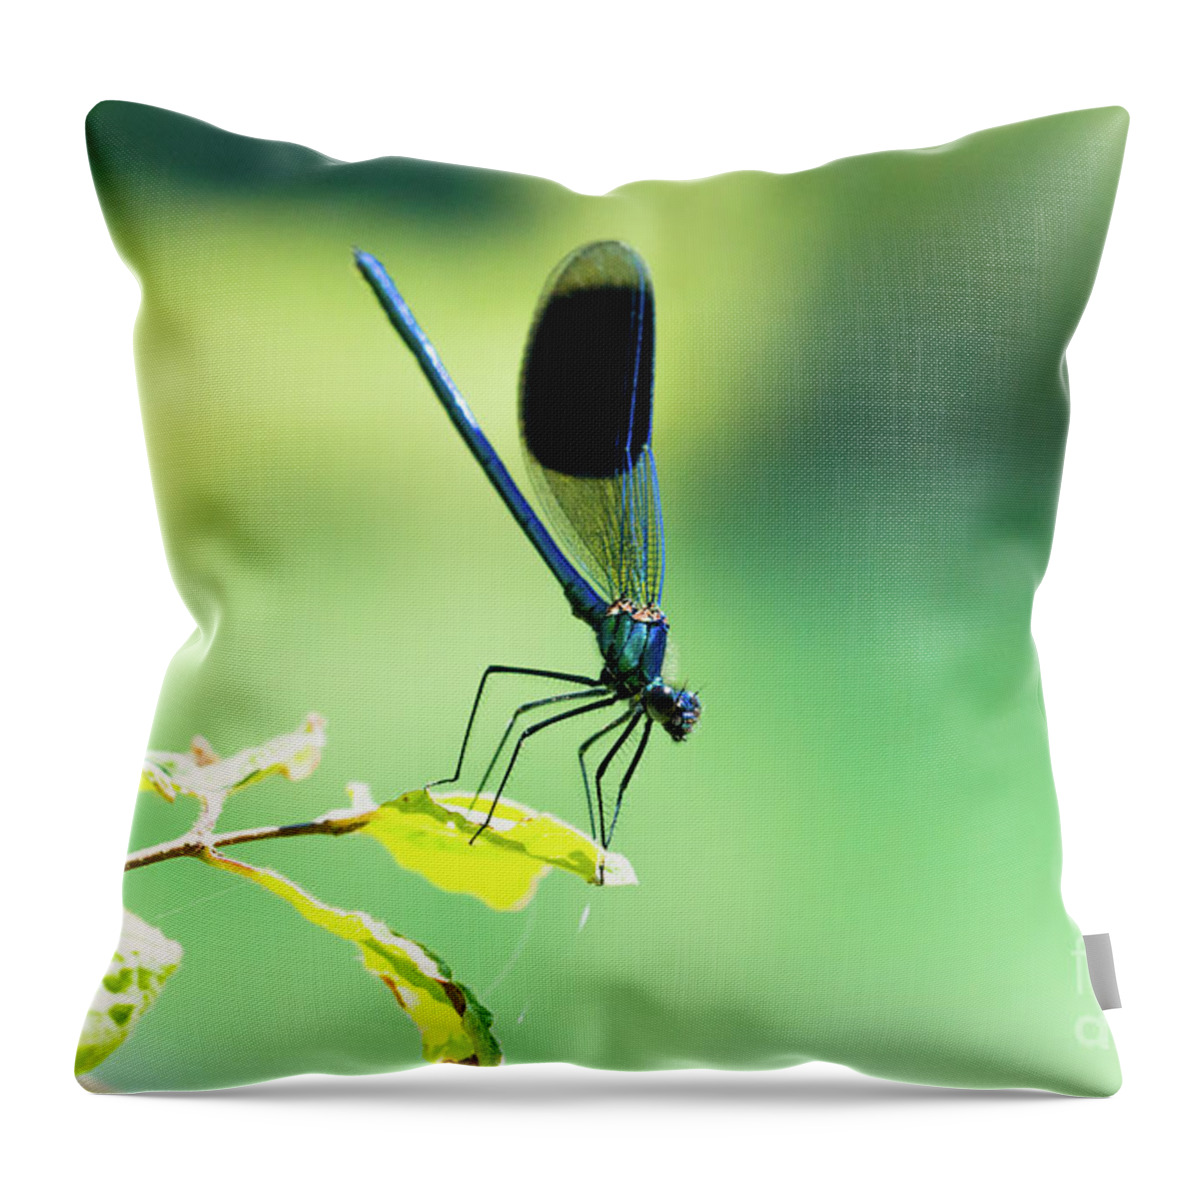 Countryside Throw Pillow featuring the photograph Broad-winged Damselfly, Dragonfly by Amanda Mohler